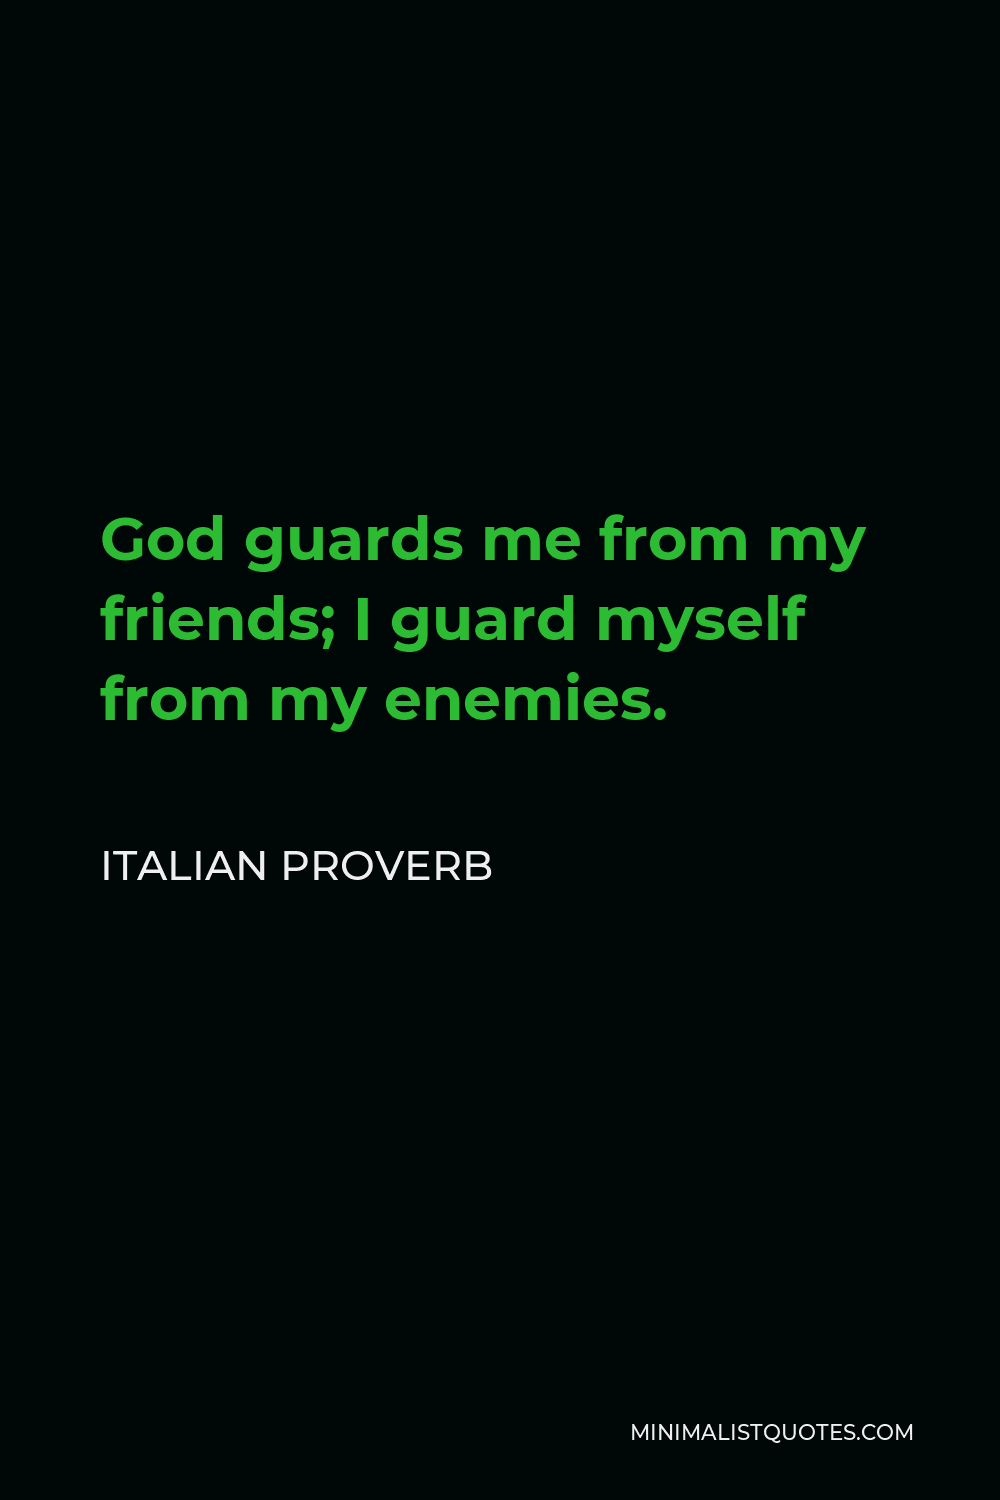 Italian Proverb Quote - God guards me from my friends; I guard myself from my enemies.